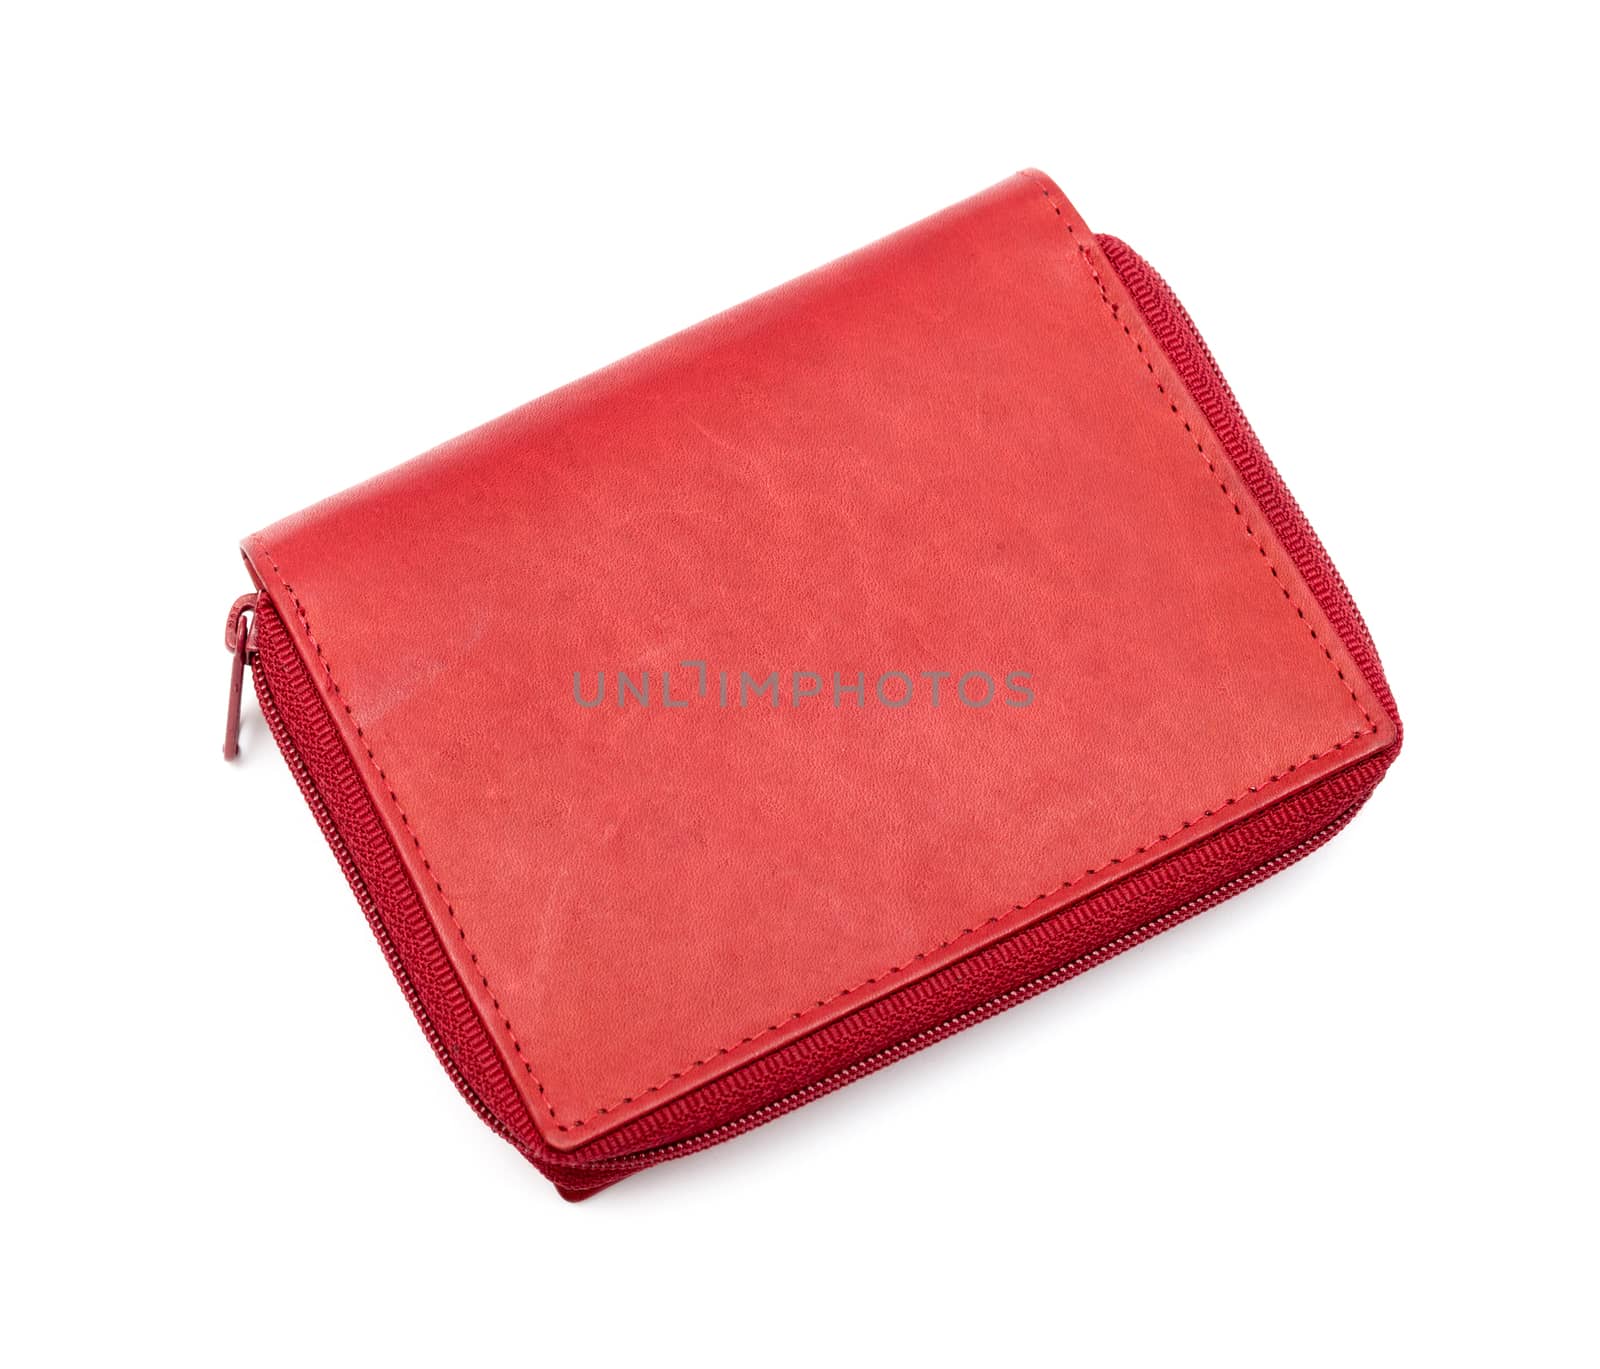 Modern red wallet isolated on white background by DNKSTUDIO